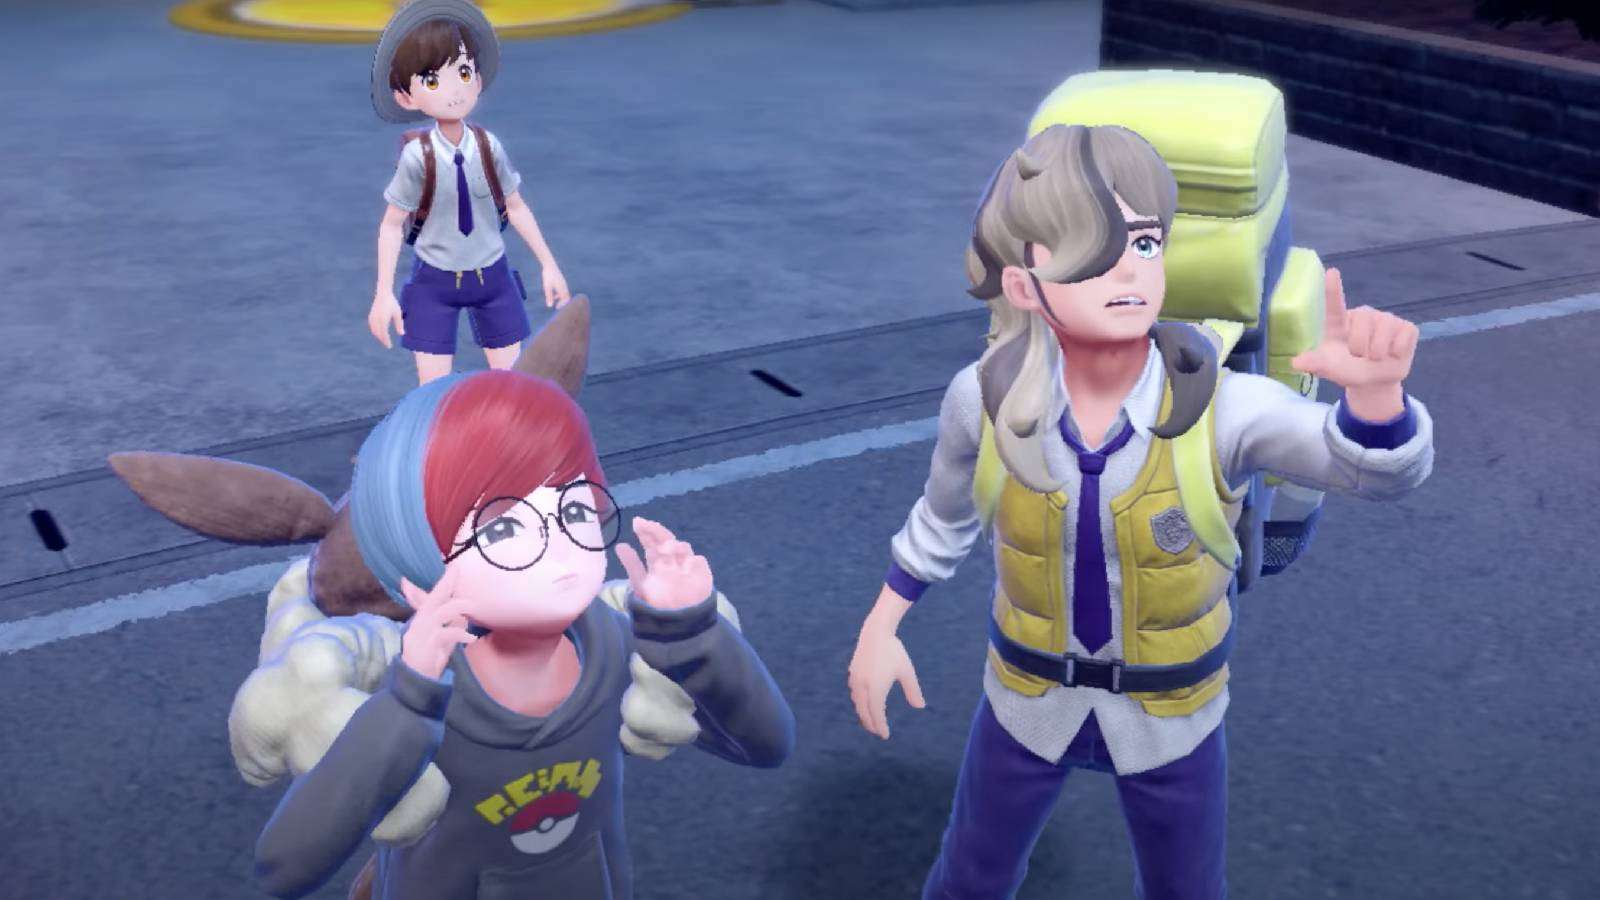 The Pokemon Scarlet & Violet characters Penny and Arven stand in front of a Pokemon trainer, looking up at something and pointing